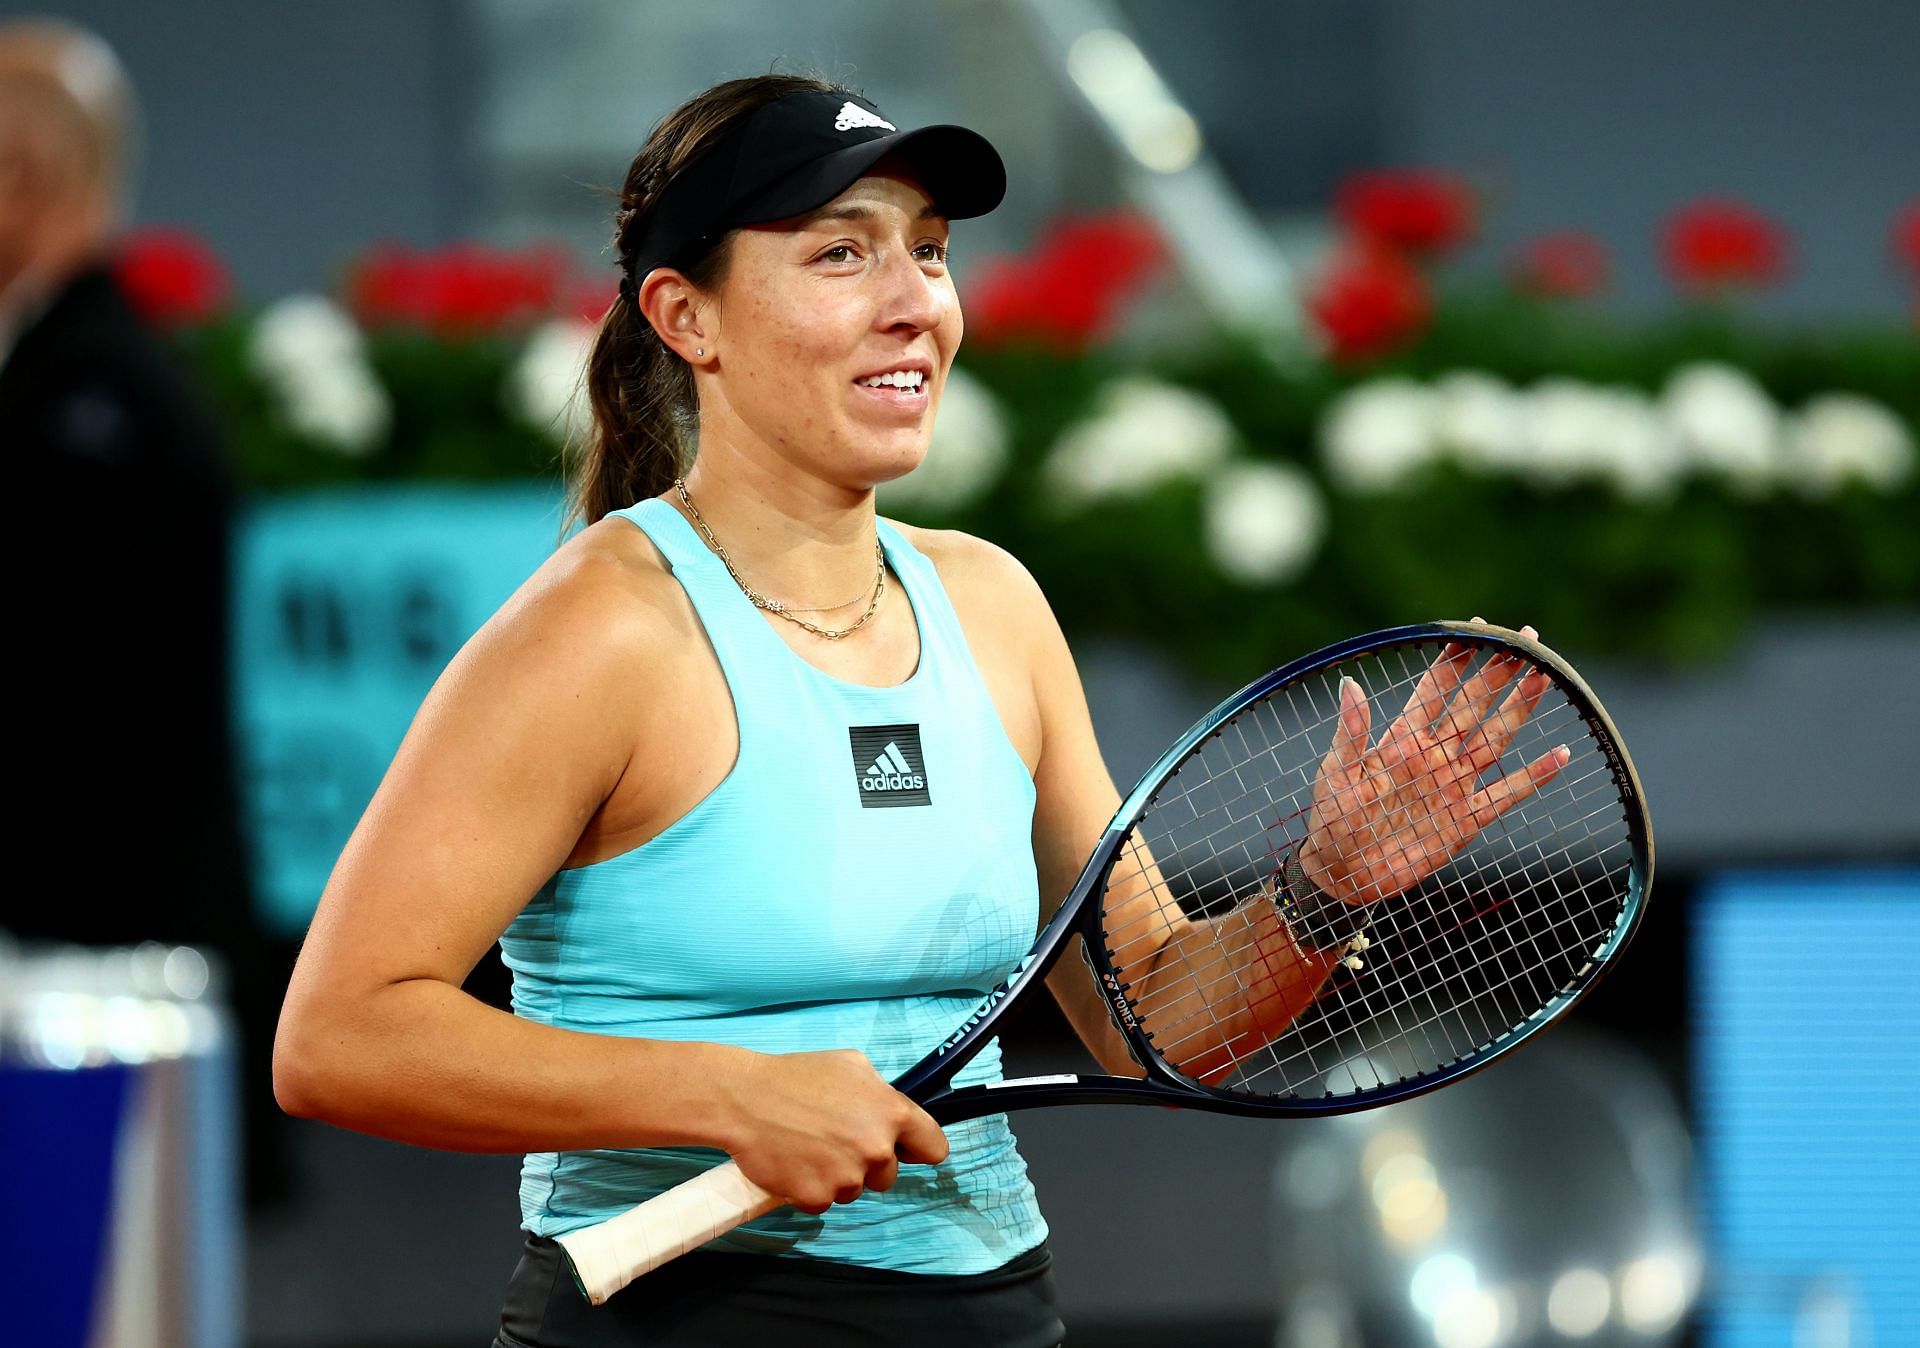 Jessica Pegula is the wealthiest tennis player in terms of net worth